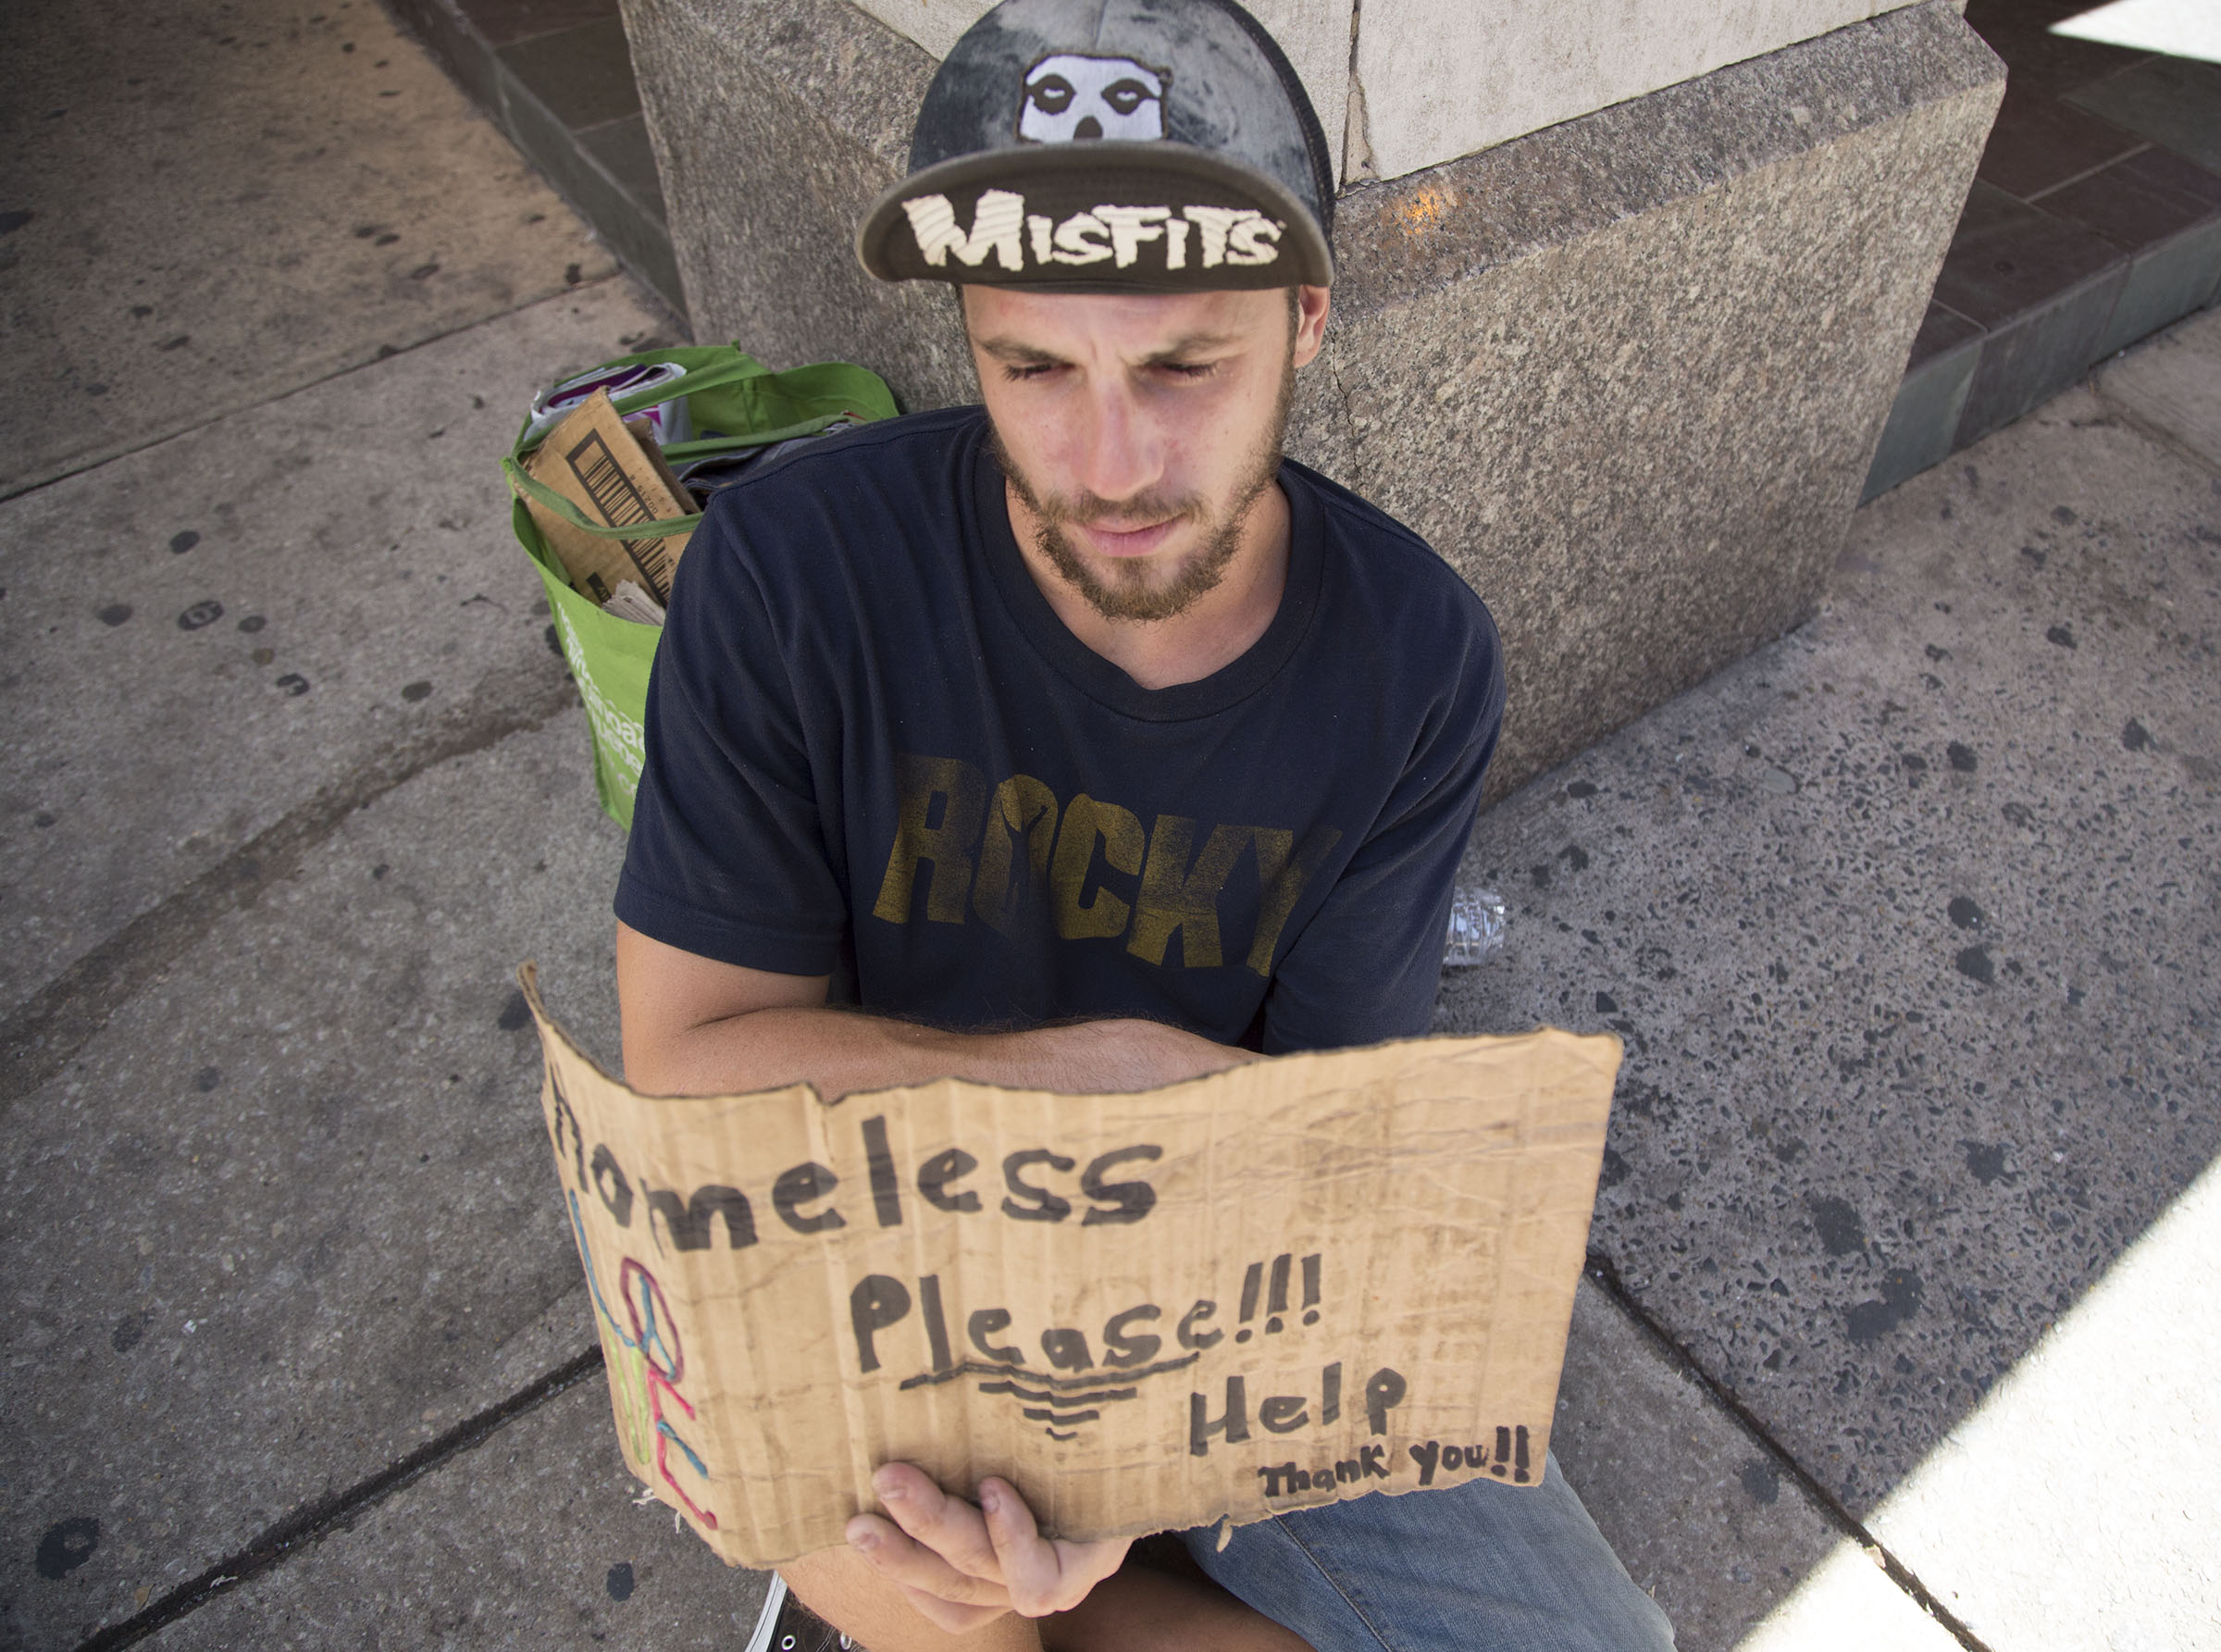 John Scott, originally from New Jersey, has been living on the streets of Philadelphia for over a year, as the city prepares for the arrival of Pope Francis. (Religion News Service/Sally Morrow)